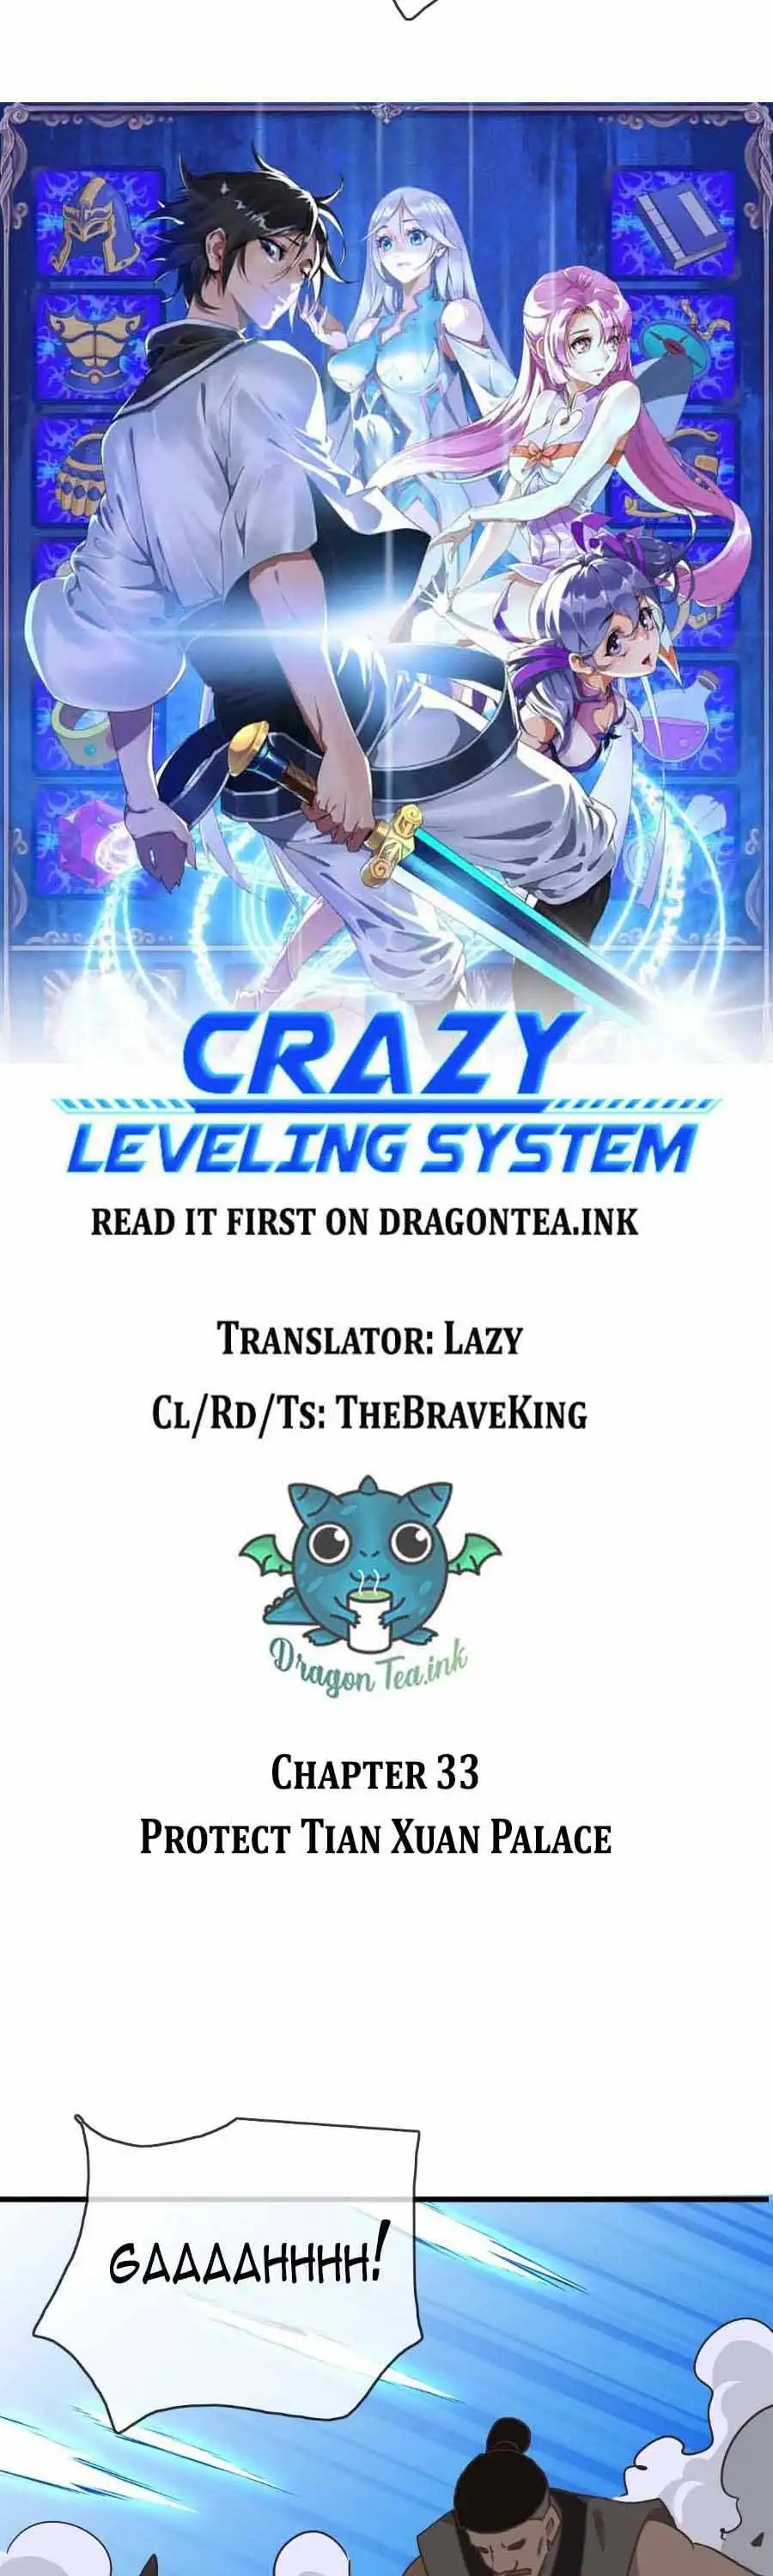 Crazy Leveling System Chapter 33